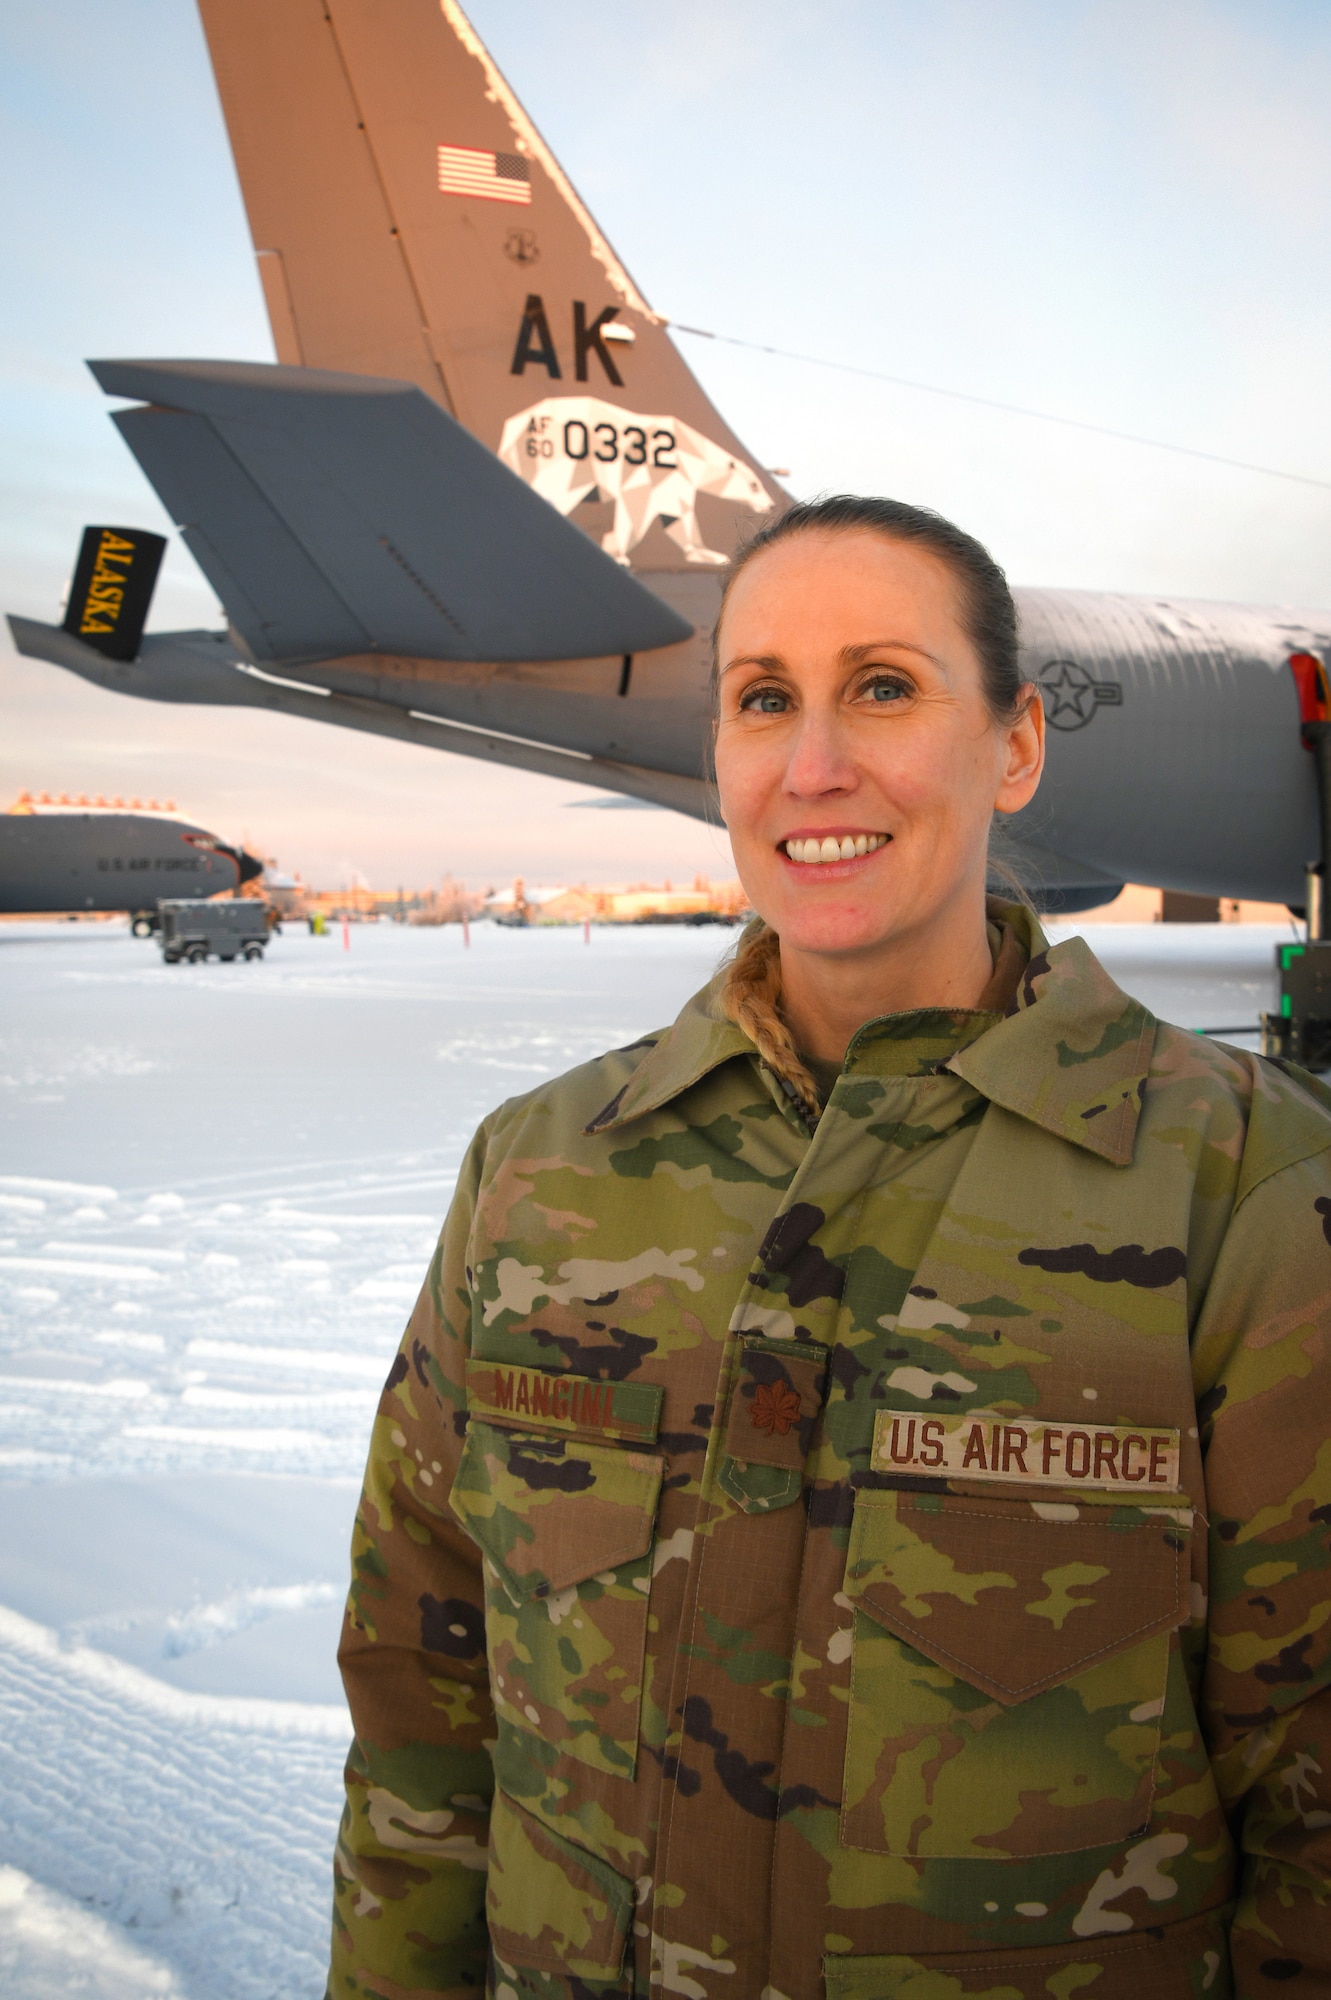 Maj. Elizabeth Mangini, 168th Wing Medical Services Corps officer, takes a photo in front of the 168th Wing's KC-135 Stratotanker at minus twenty degrees while on duty at Eielson Air Force Base. Mangini is assigned to the 168th Medical Group in support of the wing's arctic refueling mission. (U.S. Air National Guard photo by Senior Master Sgt. Julie Avey)